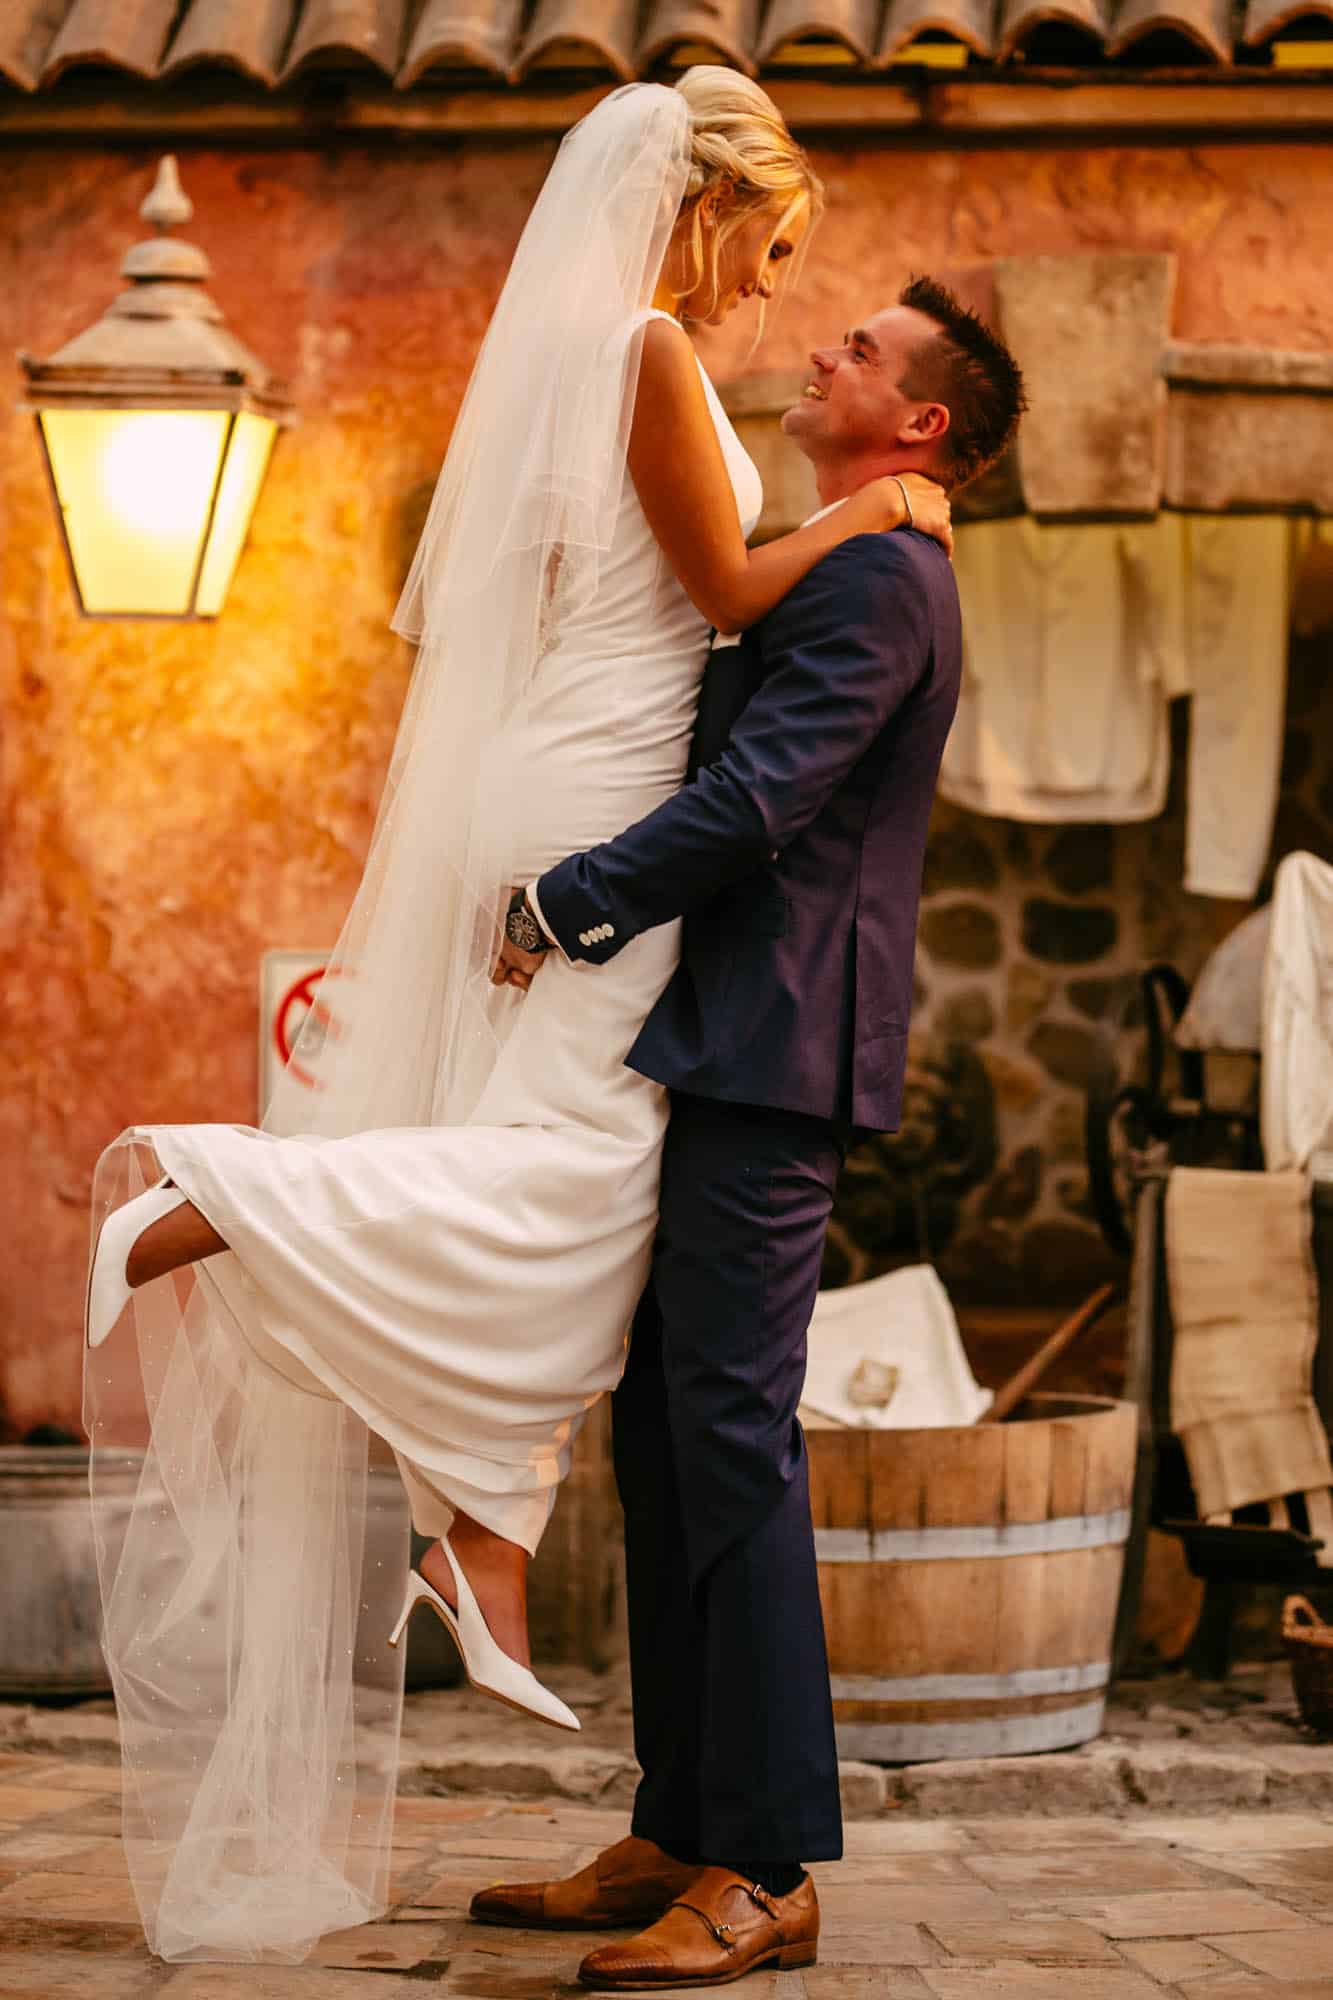 A bride and groom hug in front of a wine cellar.